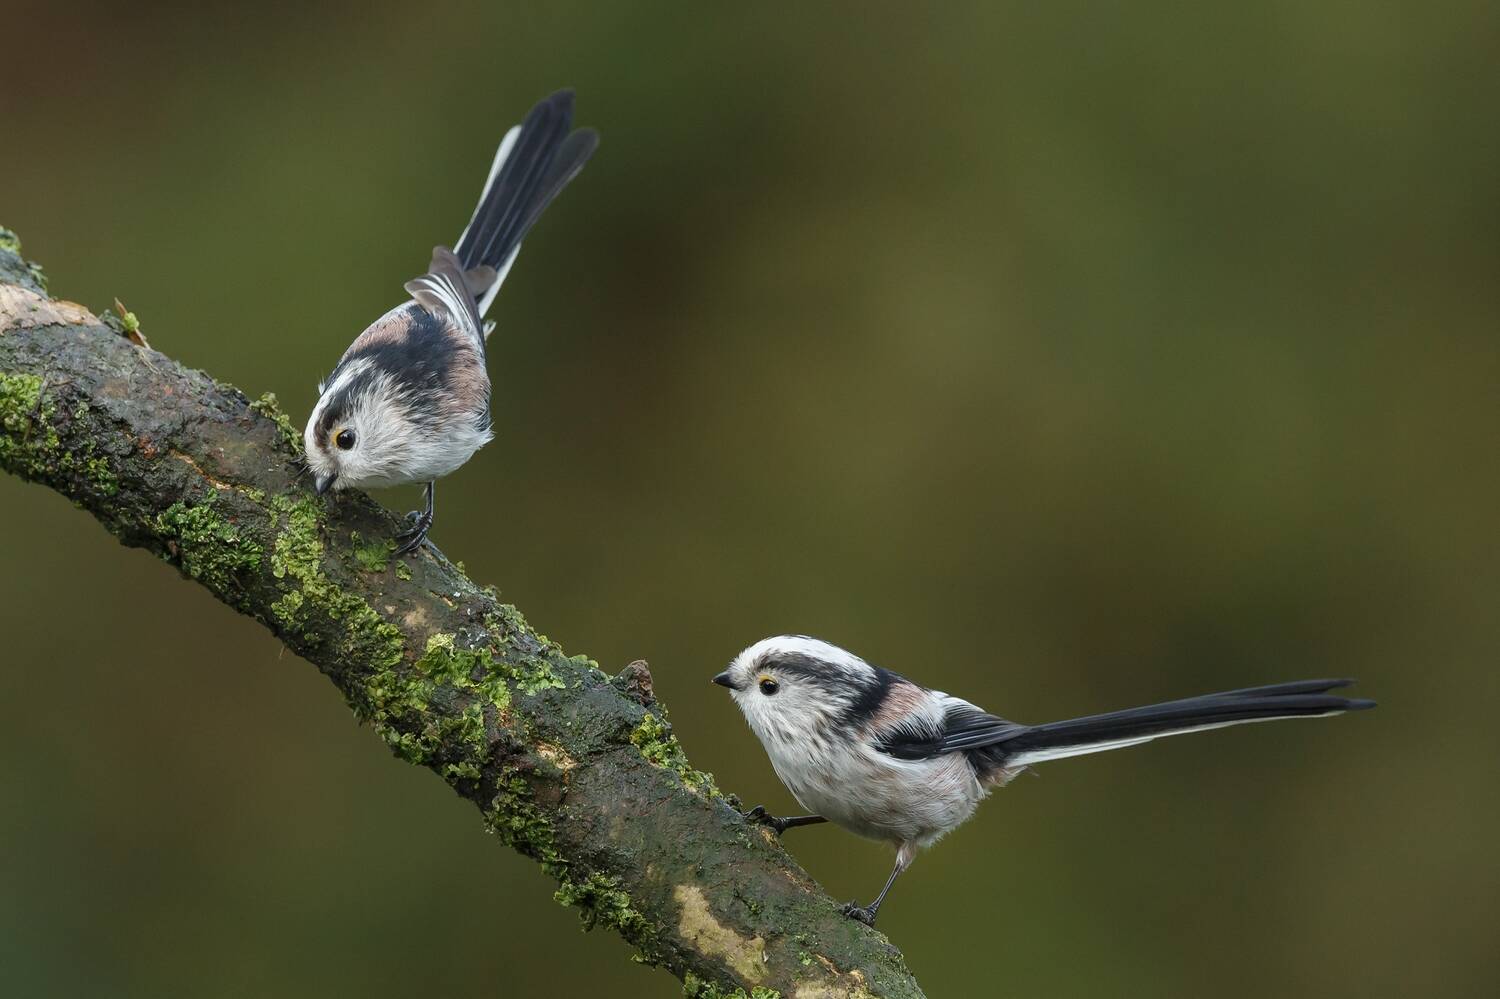 Two long-tailed tits stand on a lichen-covered branch. Both extend their tails fully behind them. They have pale tummies, with pink and black markings on their bodies. They also have a little orange stripe above their eyes.